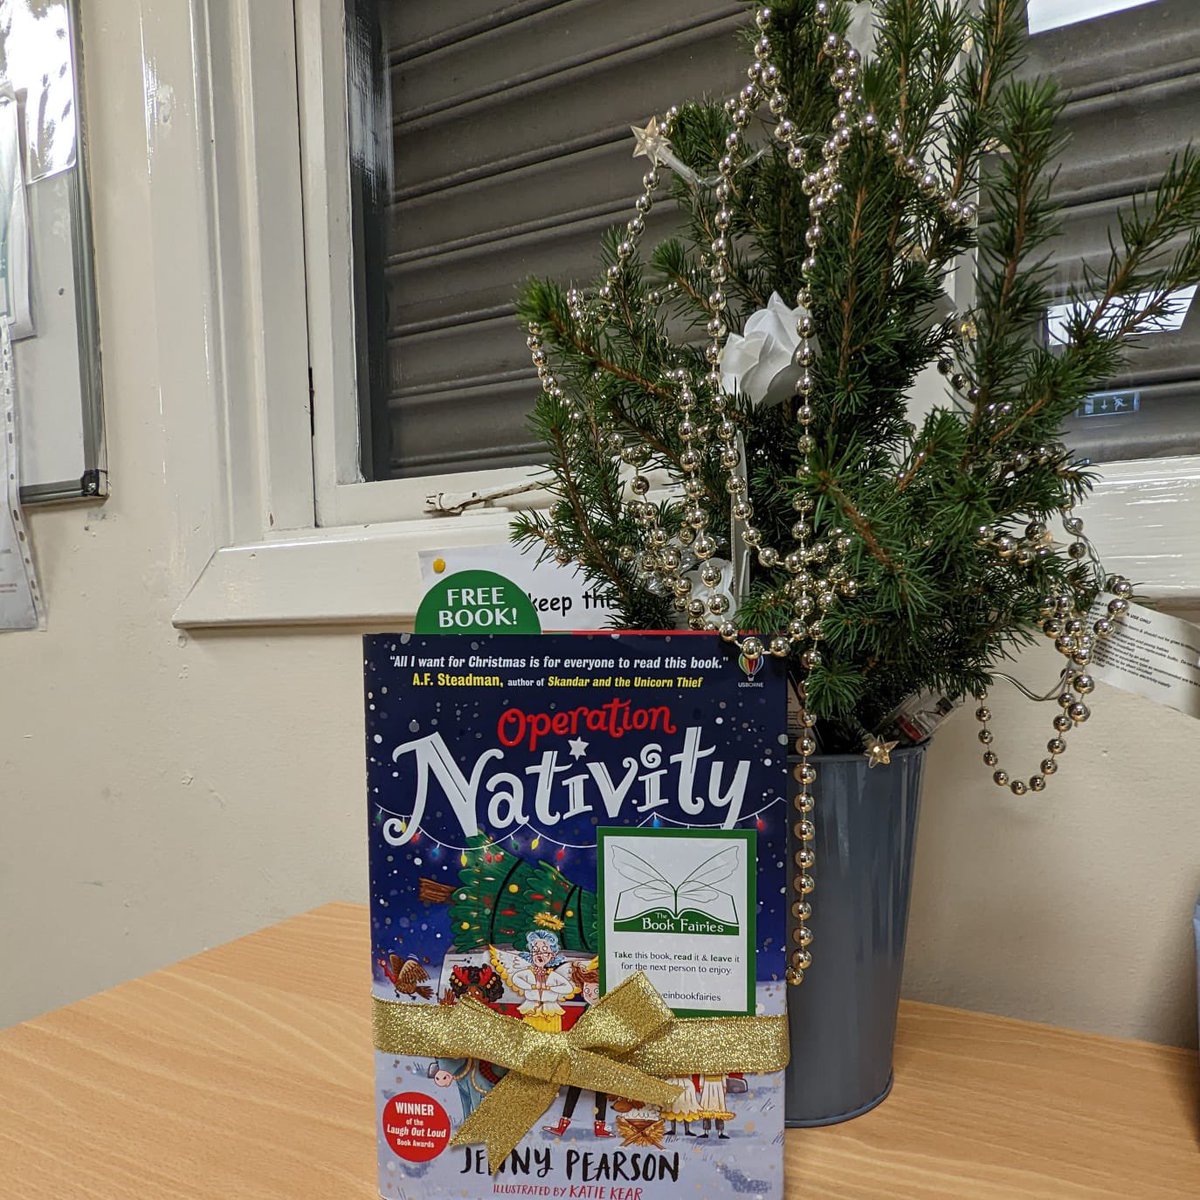 Operation NATIVITY is hitting the streets today thanks to The Book Fairies! look for copies in Kersiebank Community Centre! #IBelieveInBookFairies  #OperationNativity #TBFNativity #TBFUsborne #JennyPearson #ChristmasBooks #Falkirk #BookFairiesFalkirk @J_C_Pearson